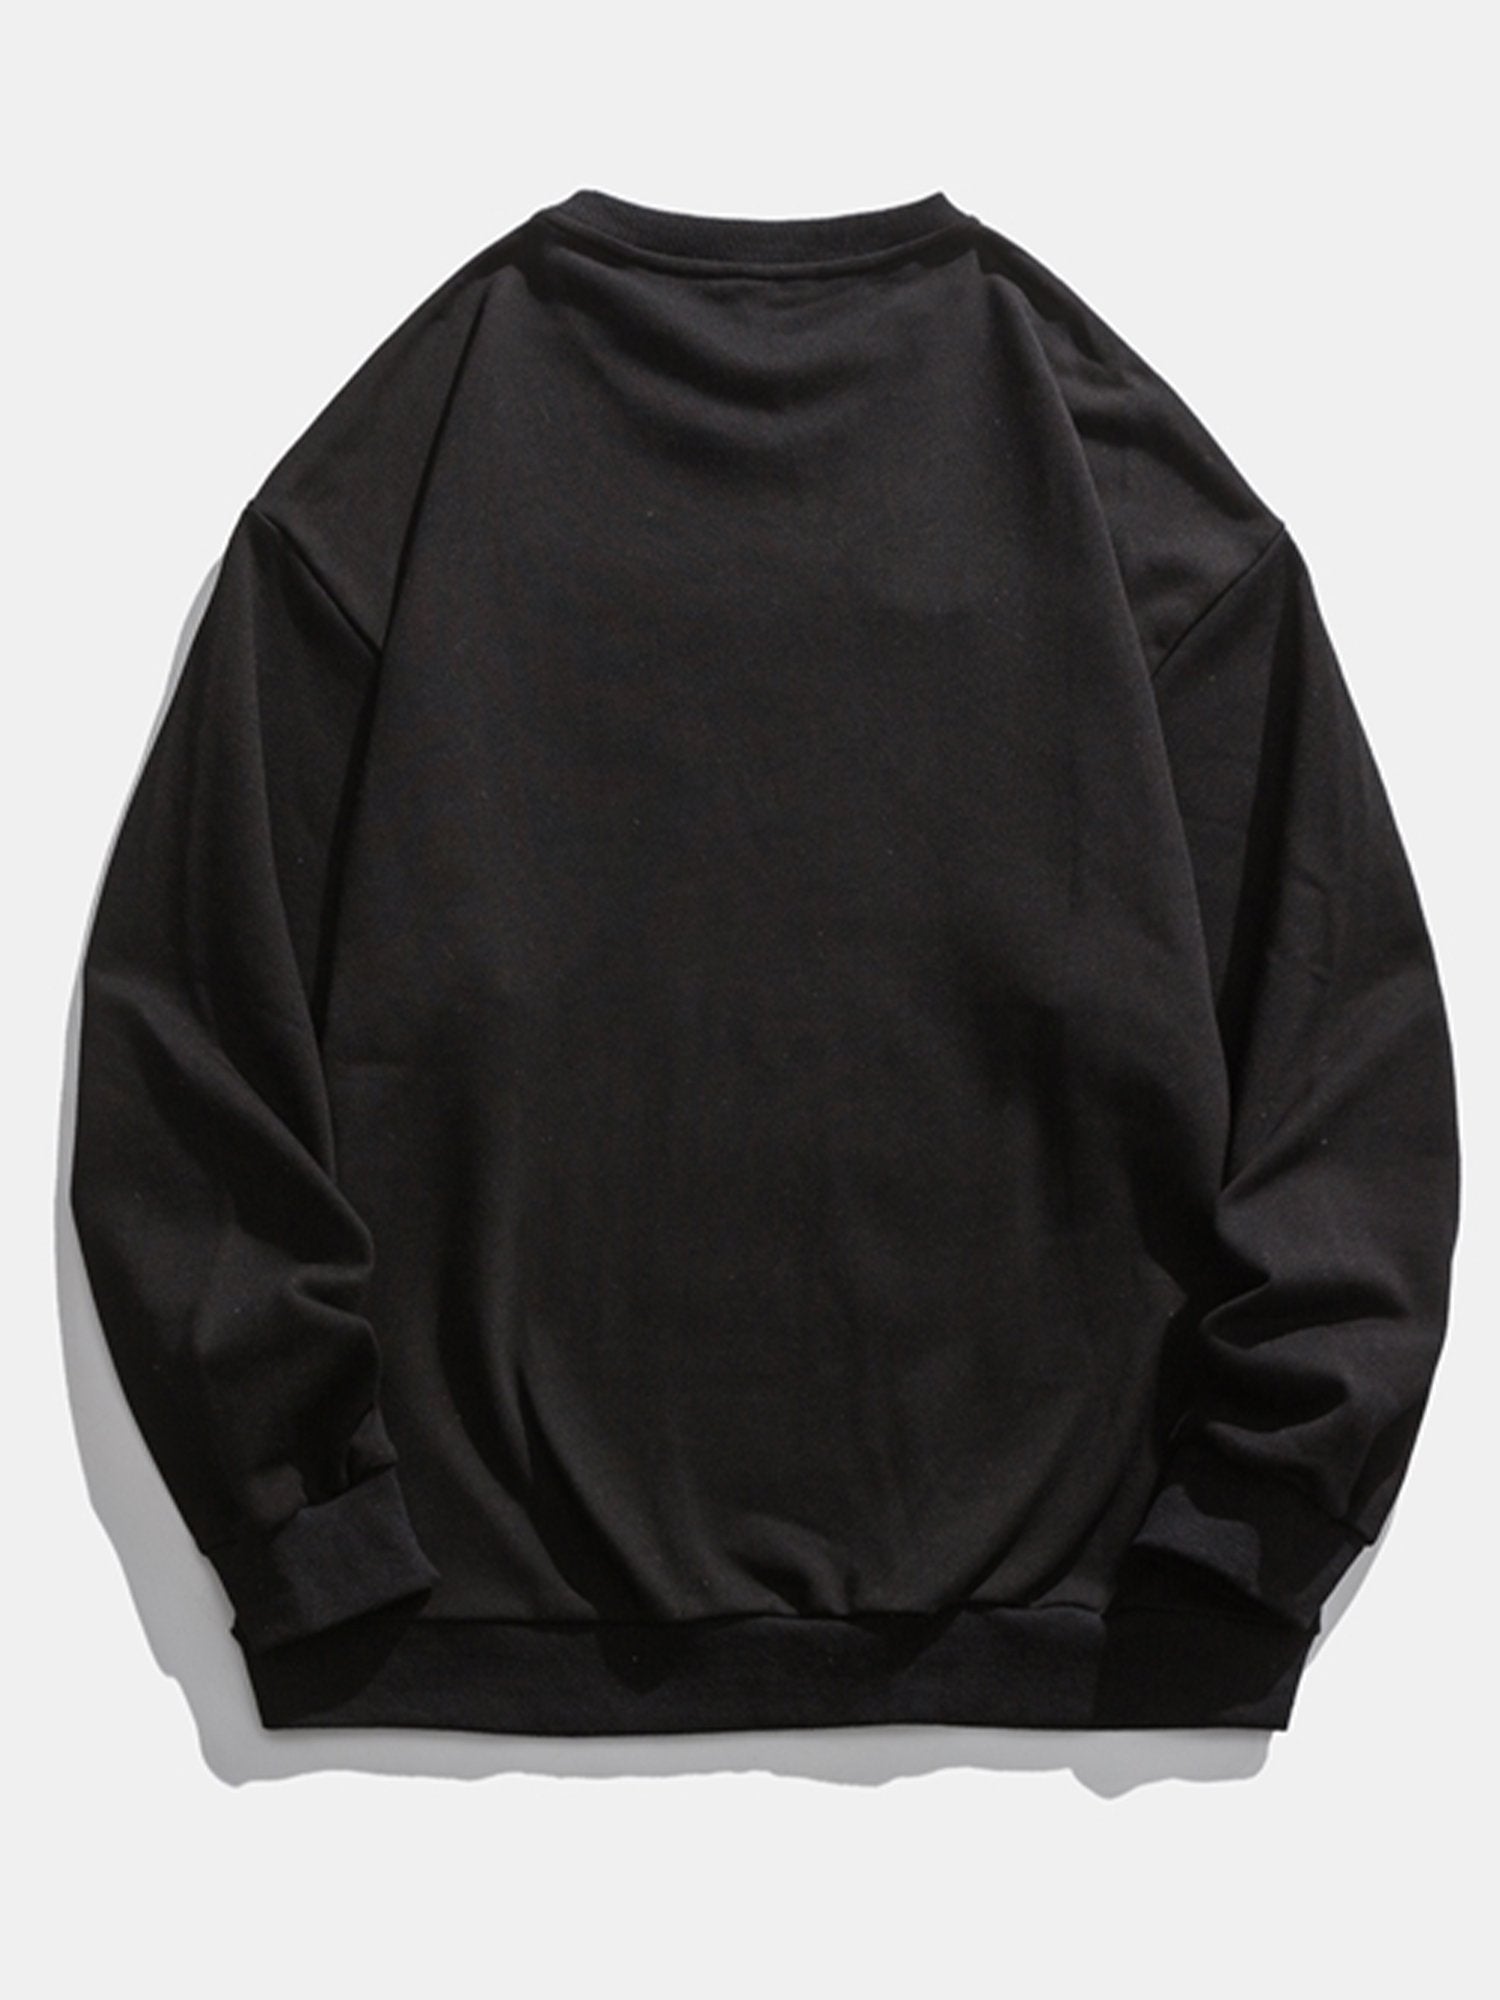 JUSTNOTAG Mode Lettre Coton Col Rond Hoodies